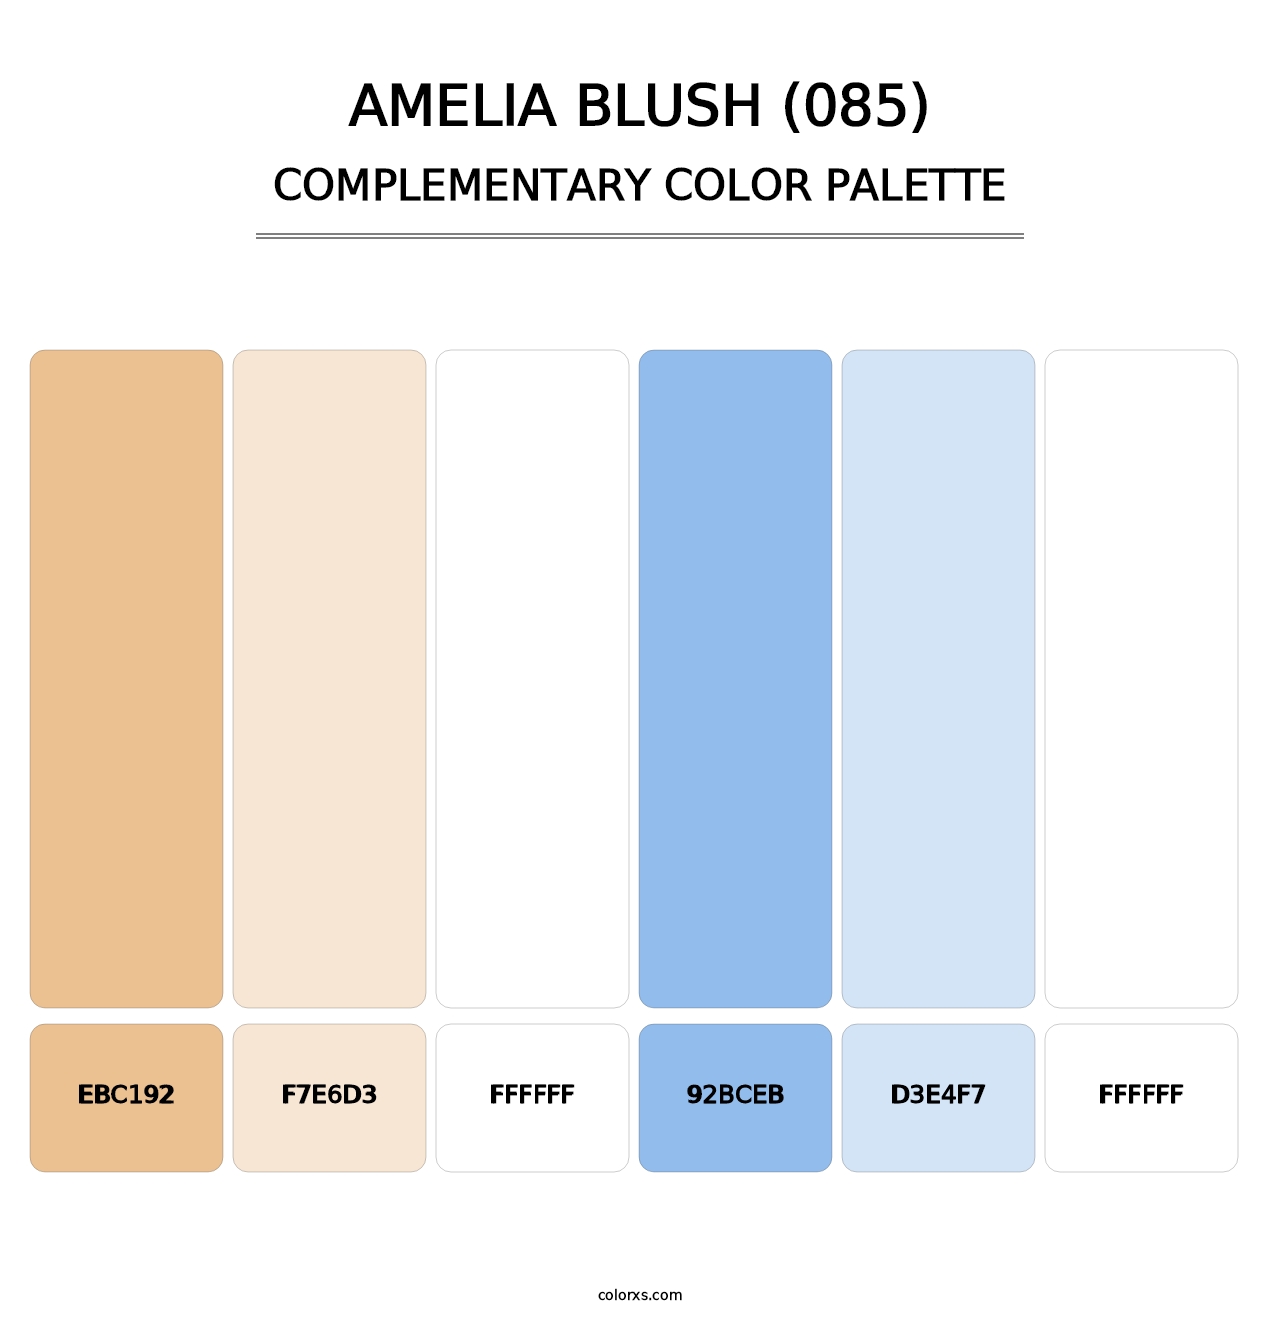 Amelia Blush (085) - Complementary Color Palette